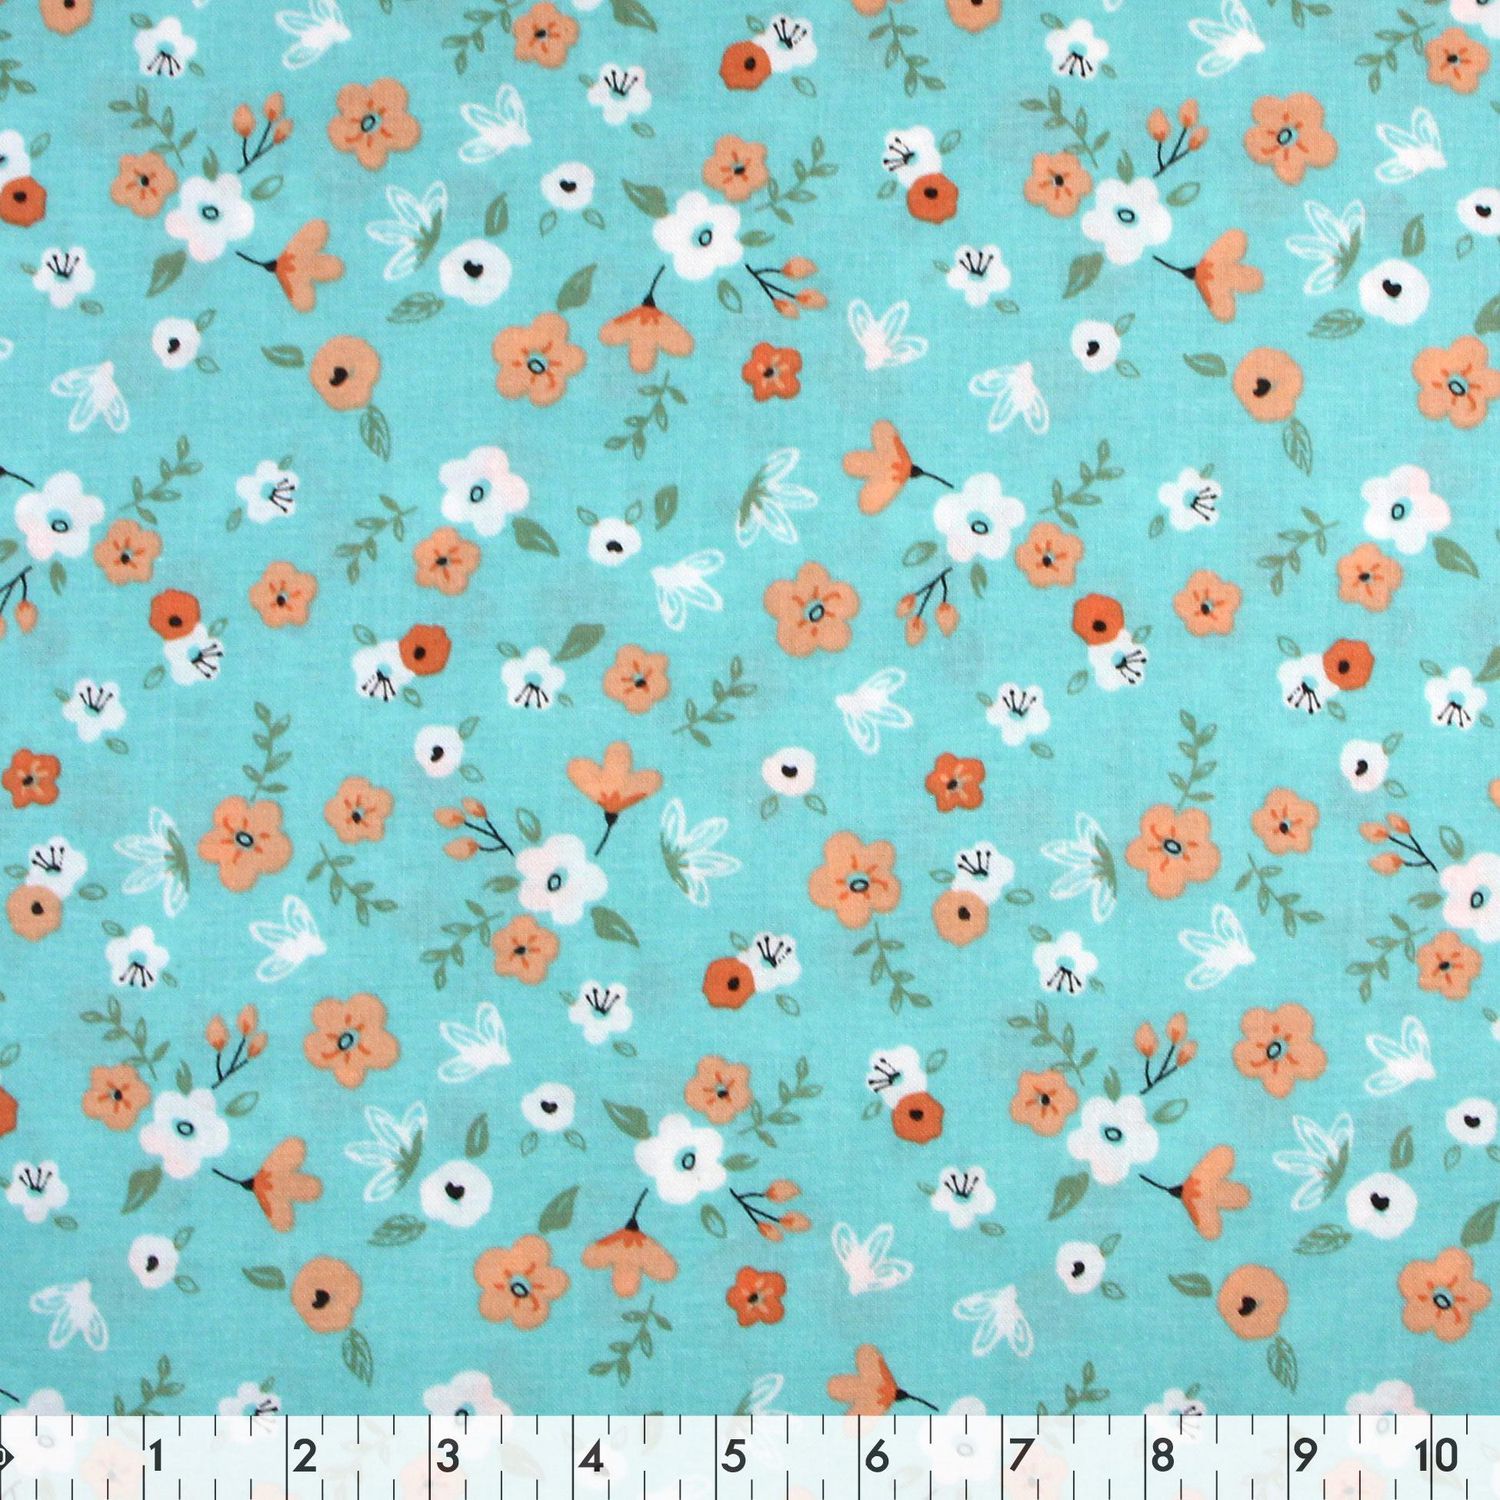 Fabric Creations Turquoise Flowers Cotton Fabric by the Metre | Walmart ...